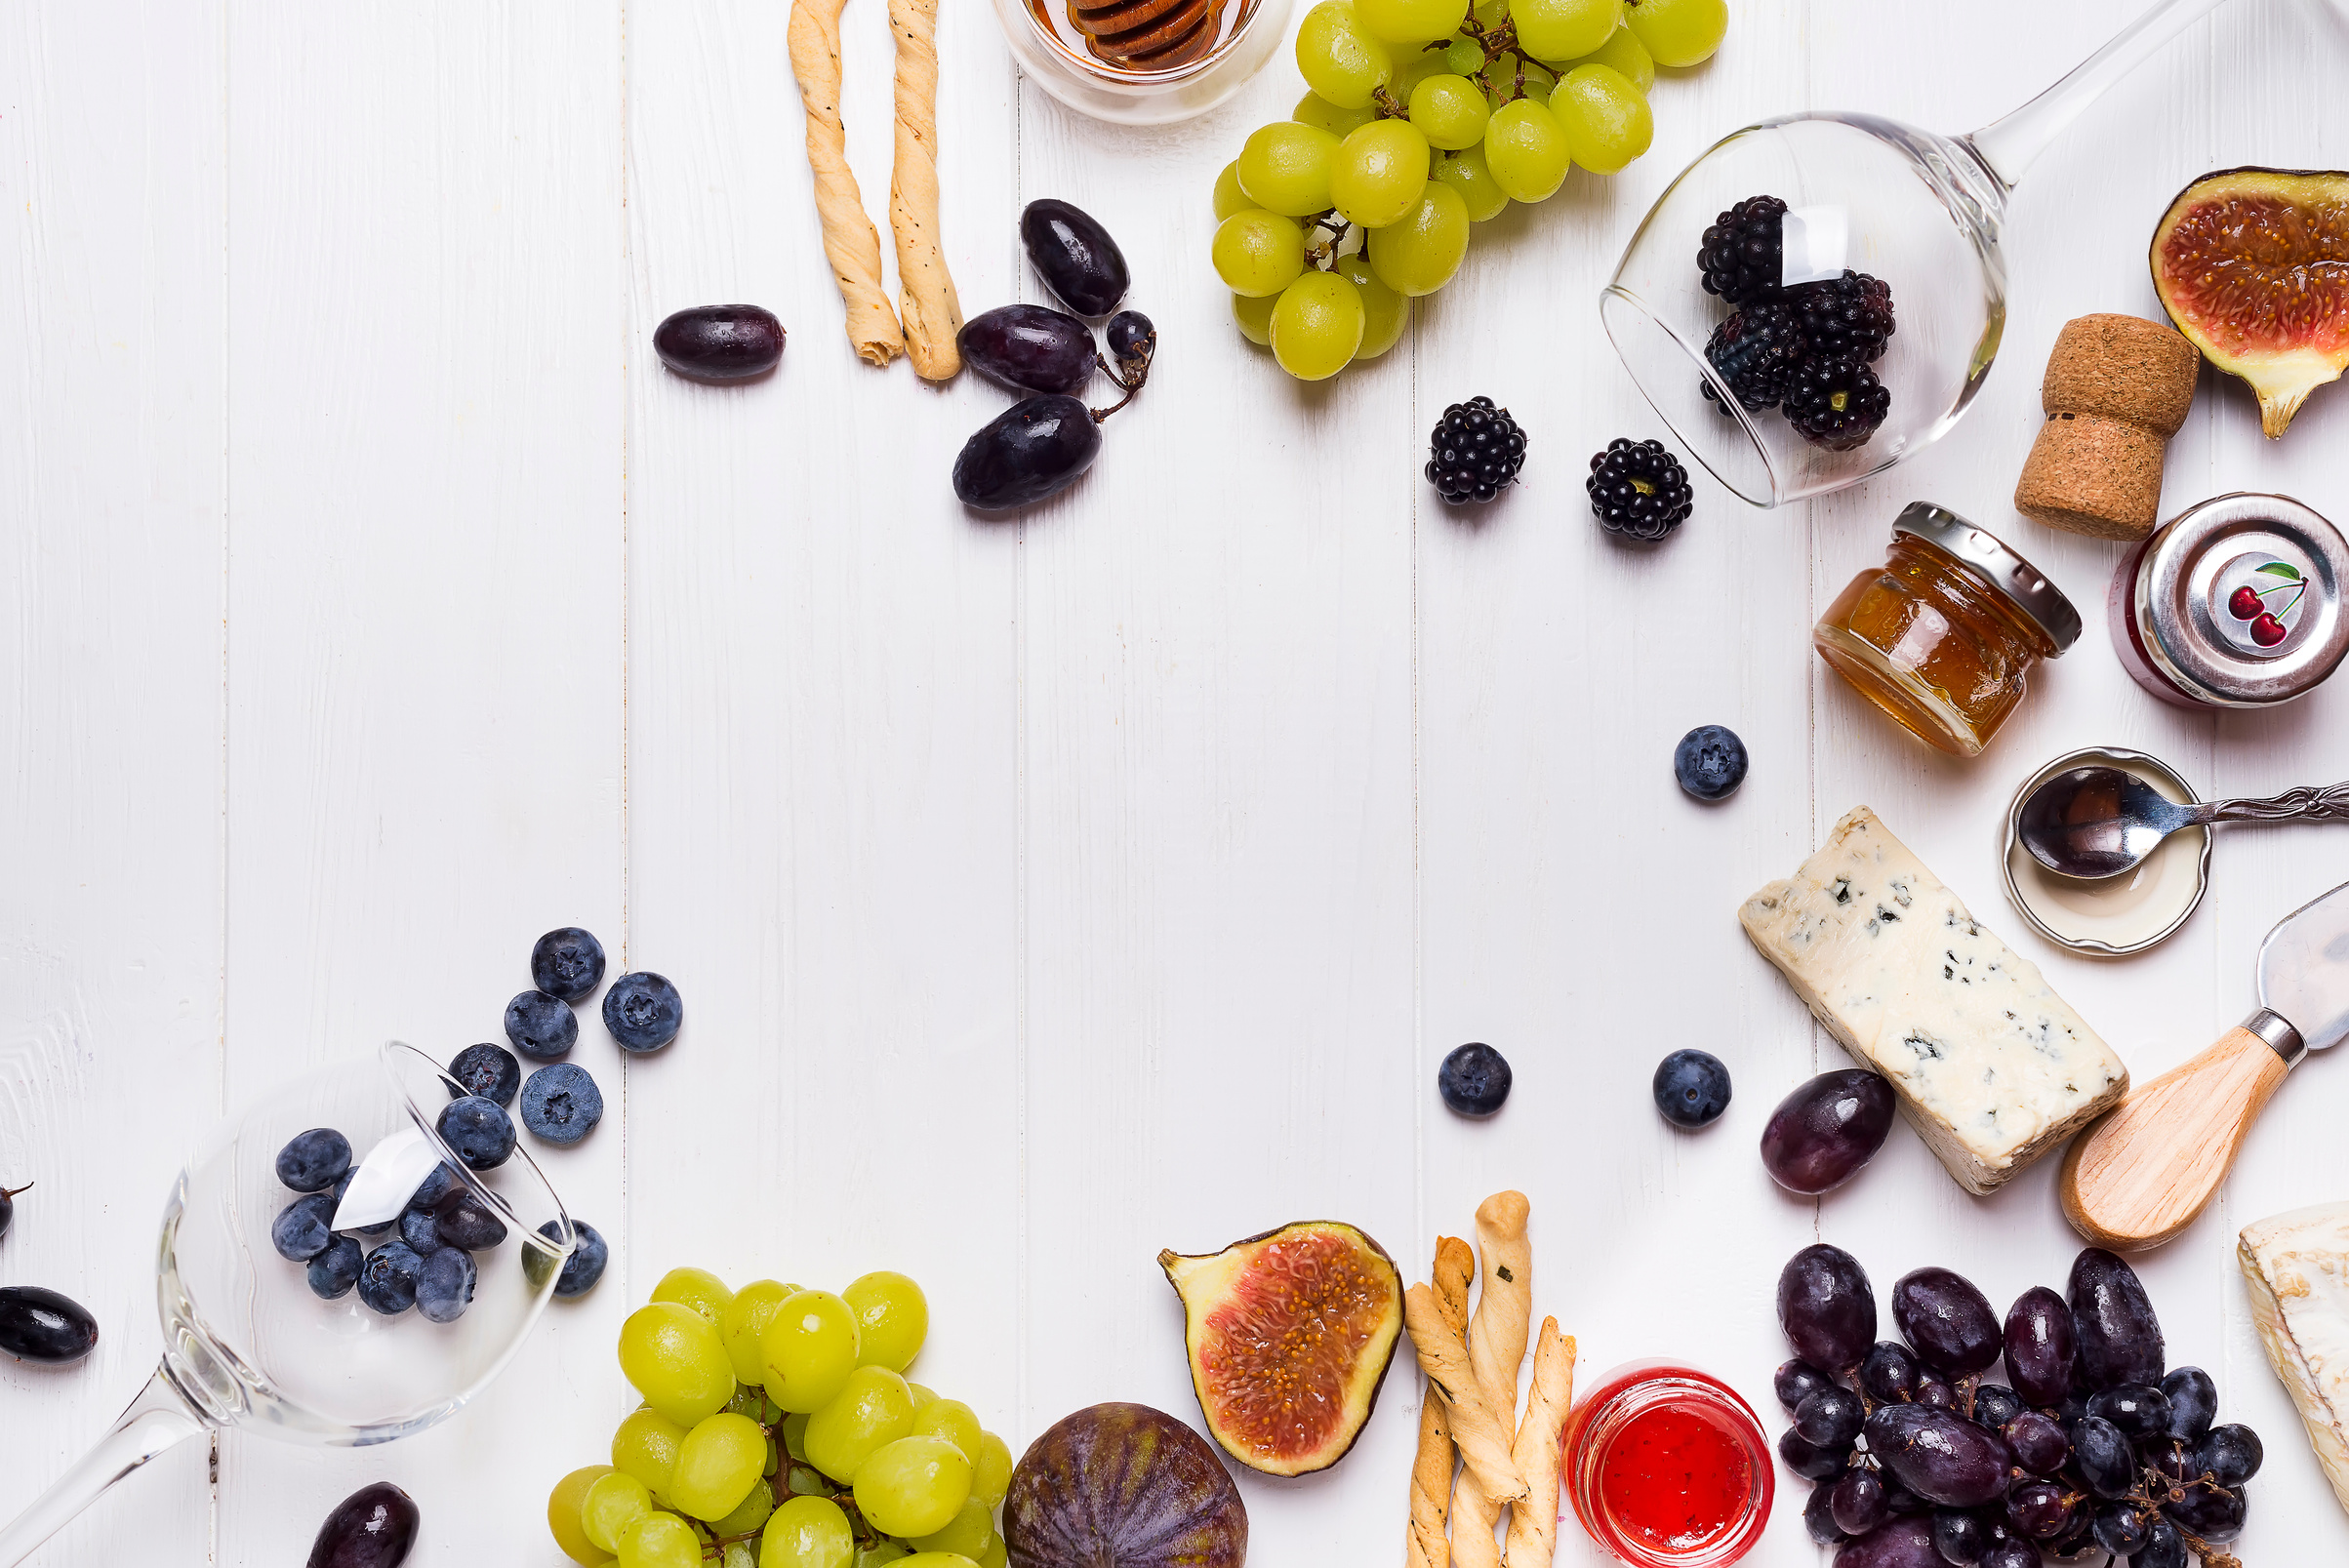 Assorted Winery Fruits and Cheese on White Wooden Background